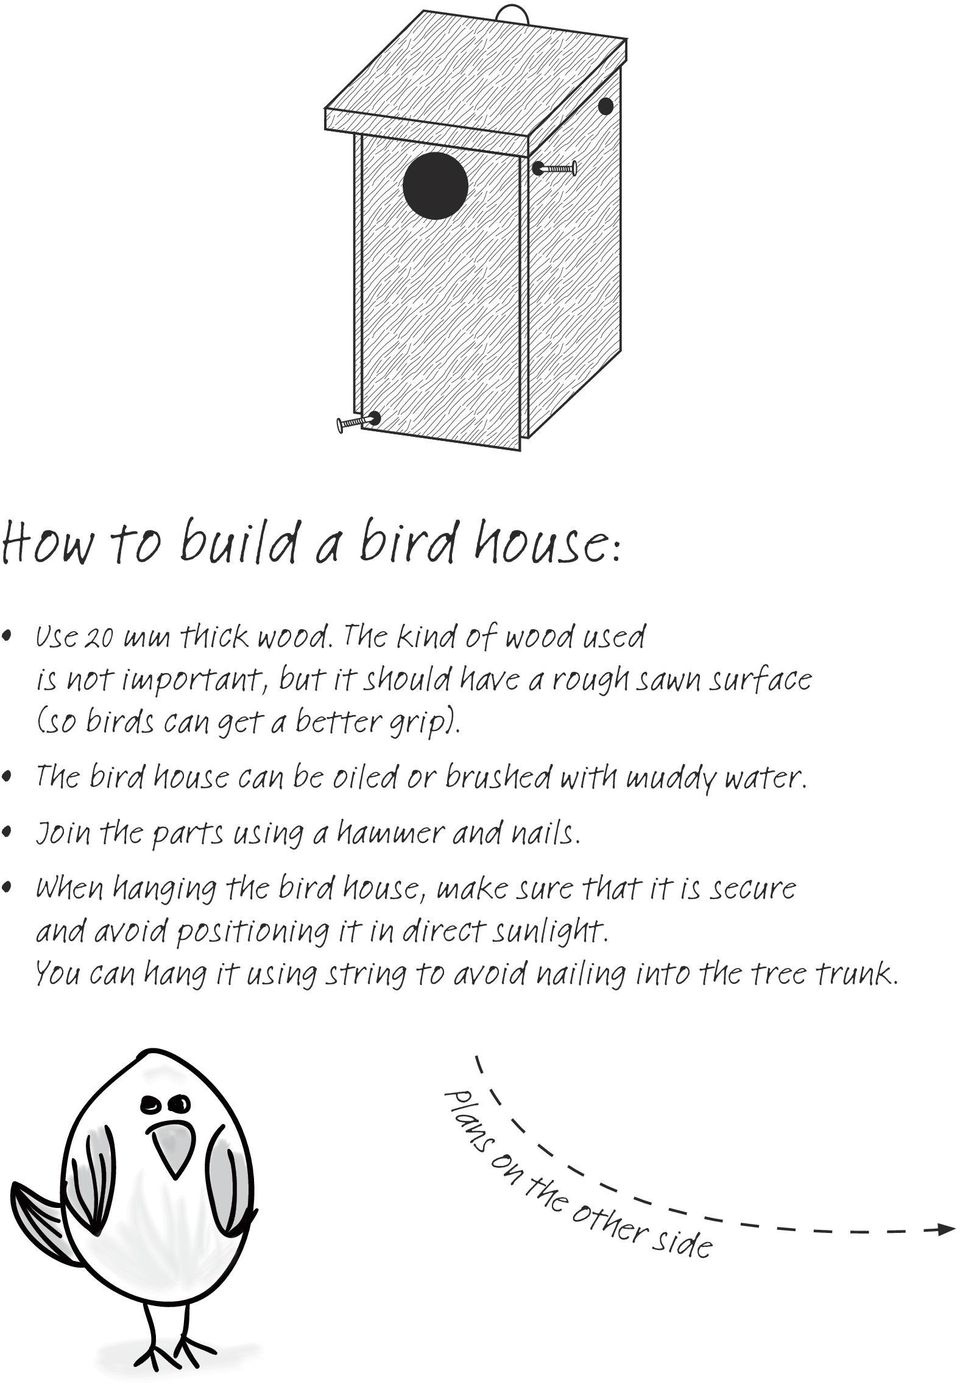 Baksida The bird house can be oiled or brushed with muddy water. Join the parts using a haer and nails.